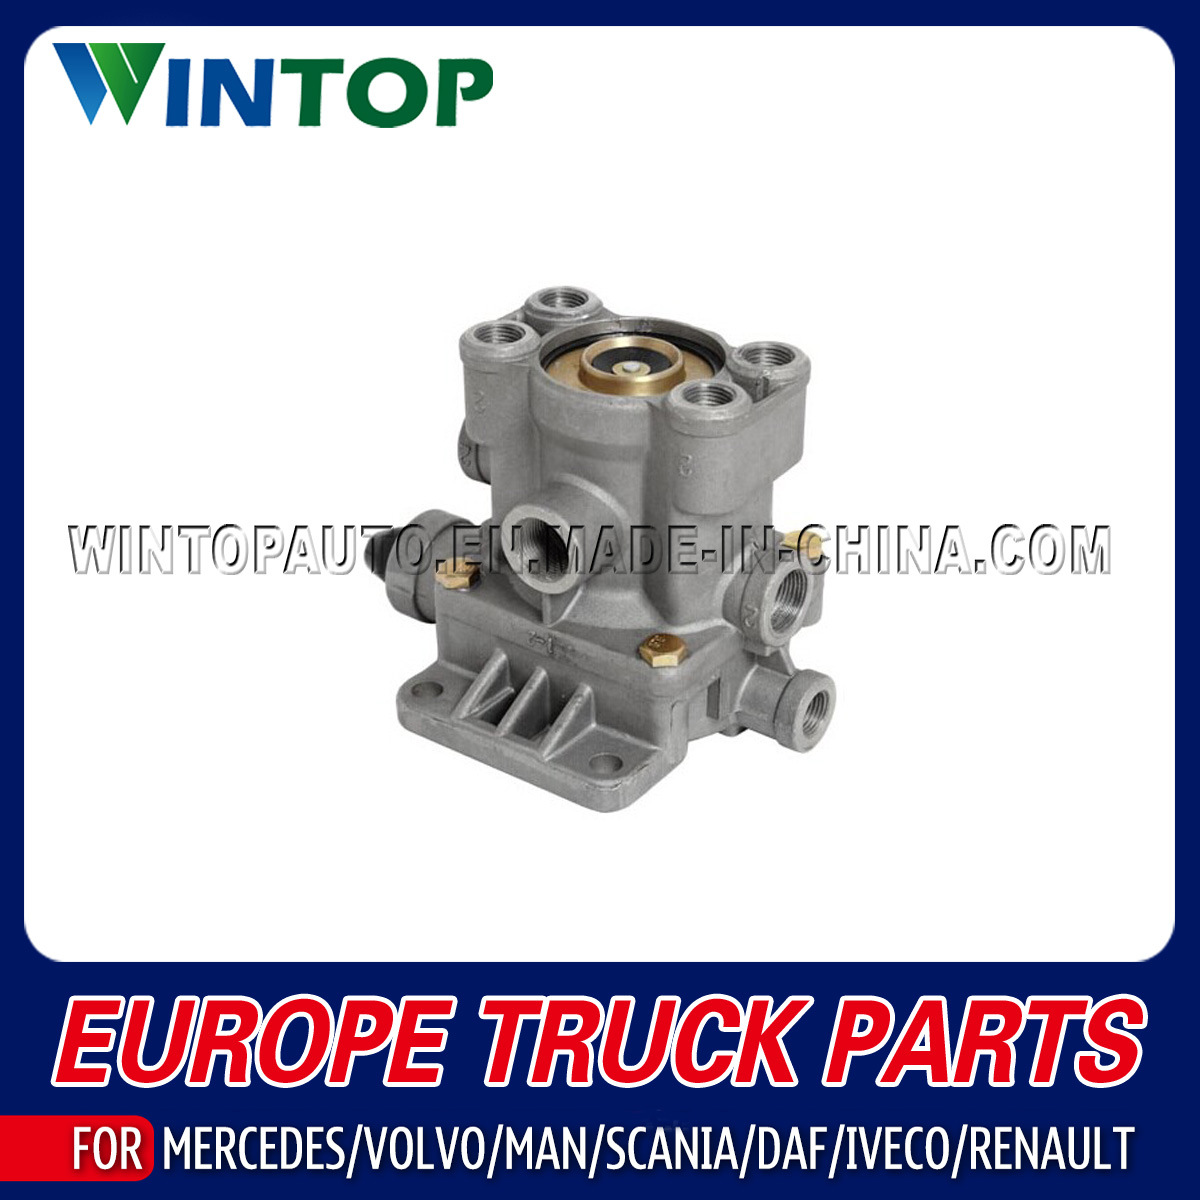 Relay Valve for Scania / Volvo / Daf / Benz/ Man / Iveco / Renault Heavy Truck OE: 9710021527